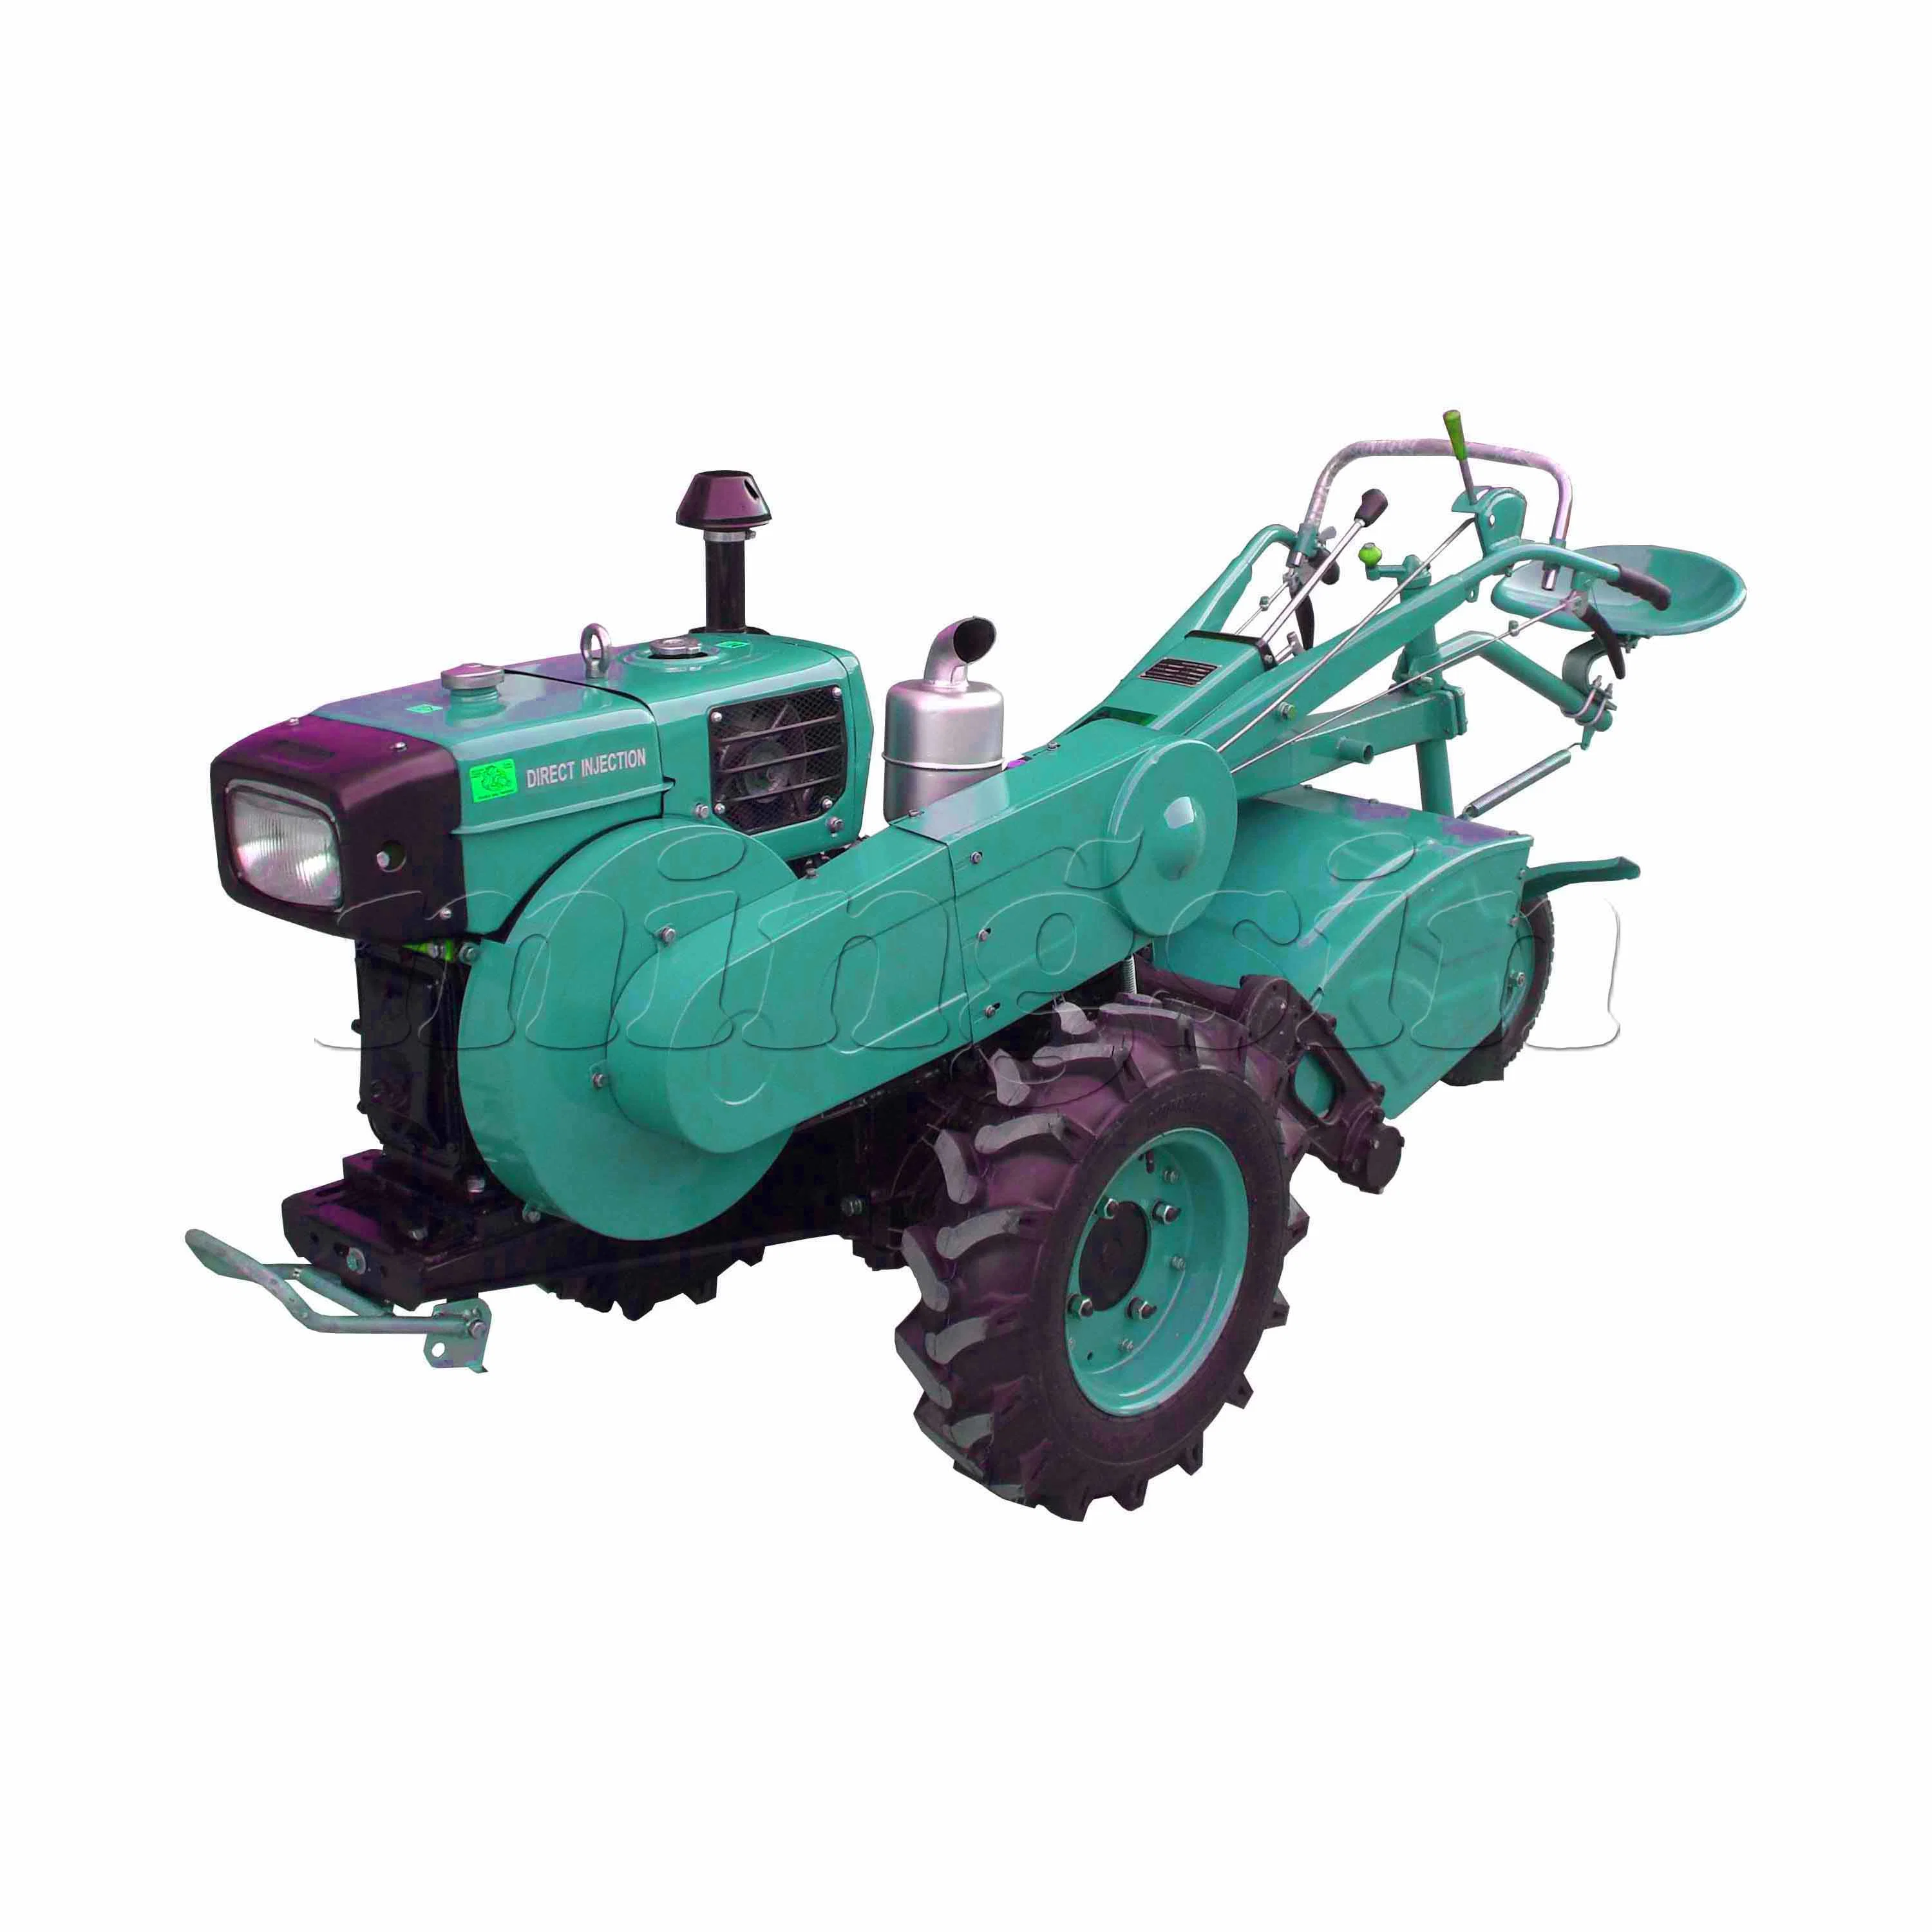 15HP Power Tiller and Walking Tractor Gn-151e (GANGA GN type) Factory Direct Supply